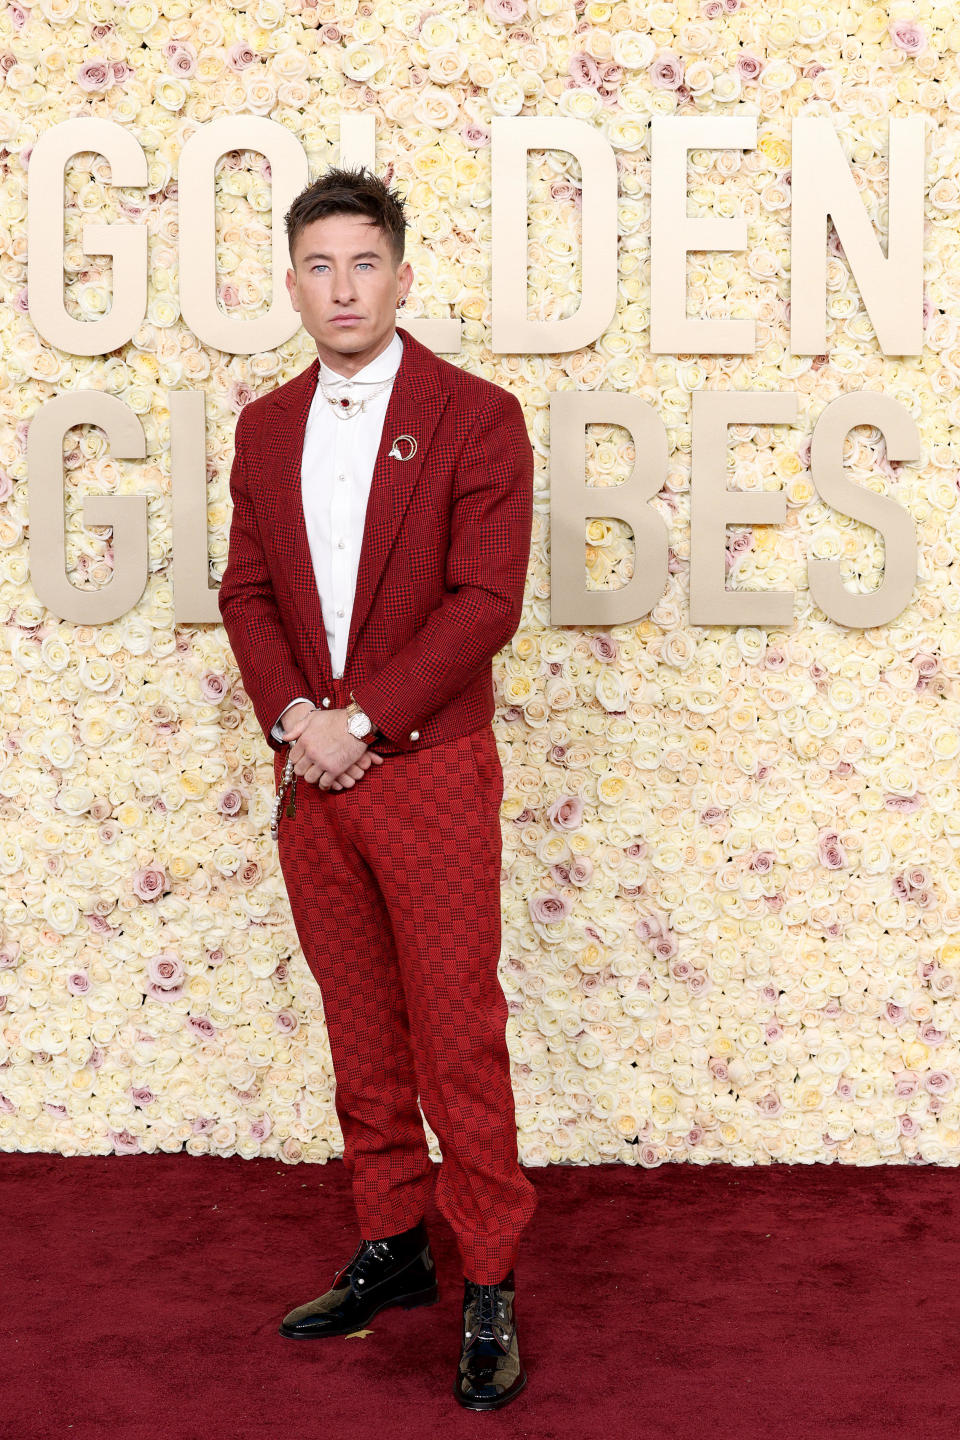 Barry Keoghan attends the 81st Annual Golden Globe Awards. / Credit: Monica Schipper/GA/The Hollywood Reporter via Getty Images